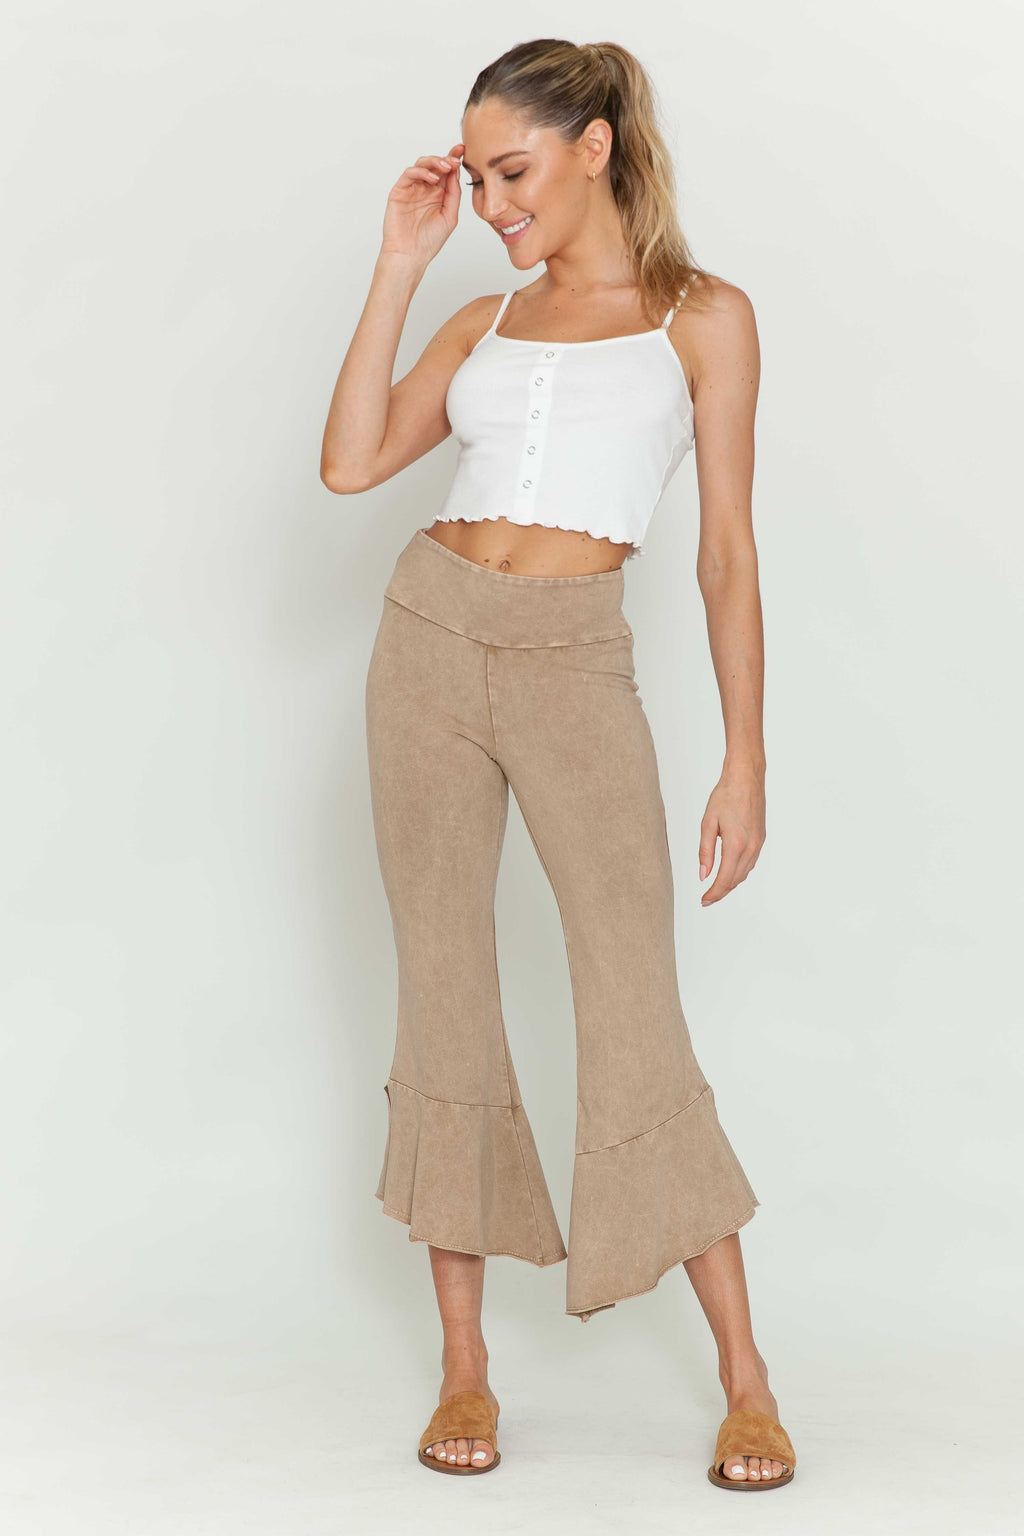 Mineral Wash Cropped Stretch Pants